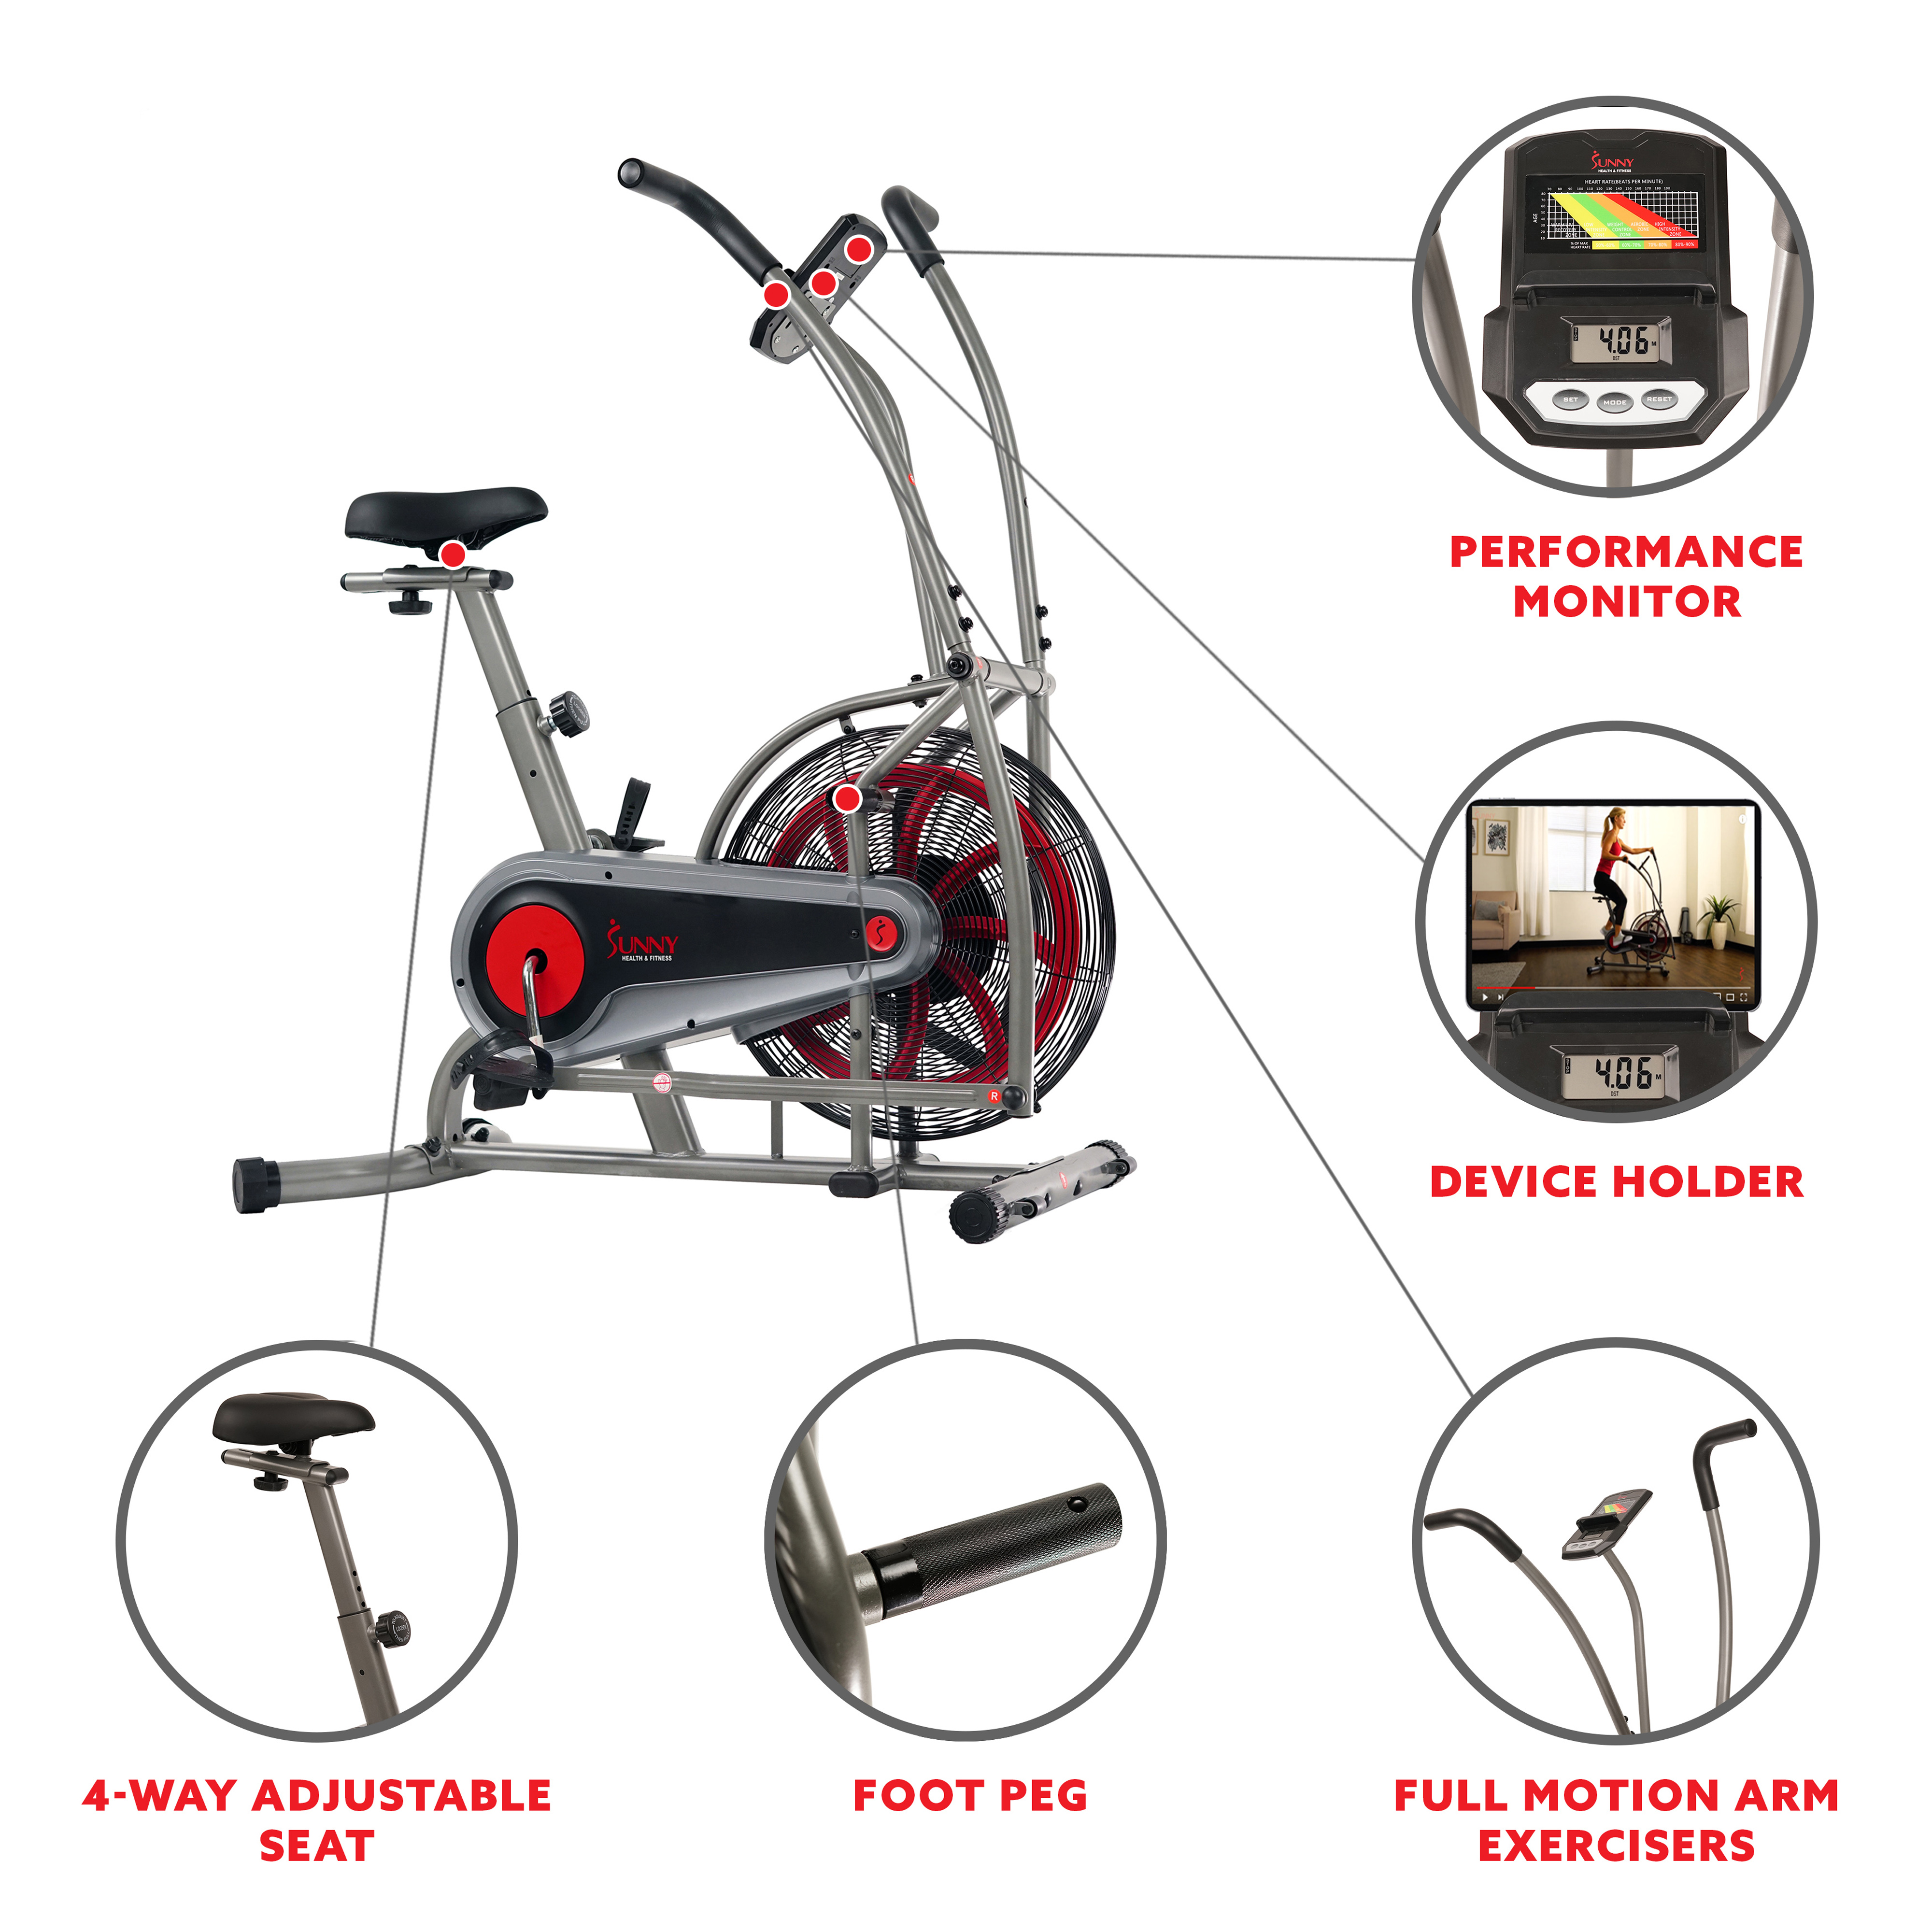 Sunny Health & Fitness Stationary Motion Fan Air Bike Exercise Machine, Indoor Home Cycling Trainer Static Bicycle, SF-B2916 - image 3 of 8